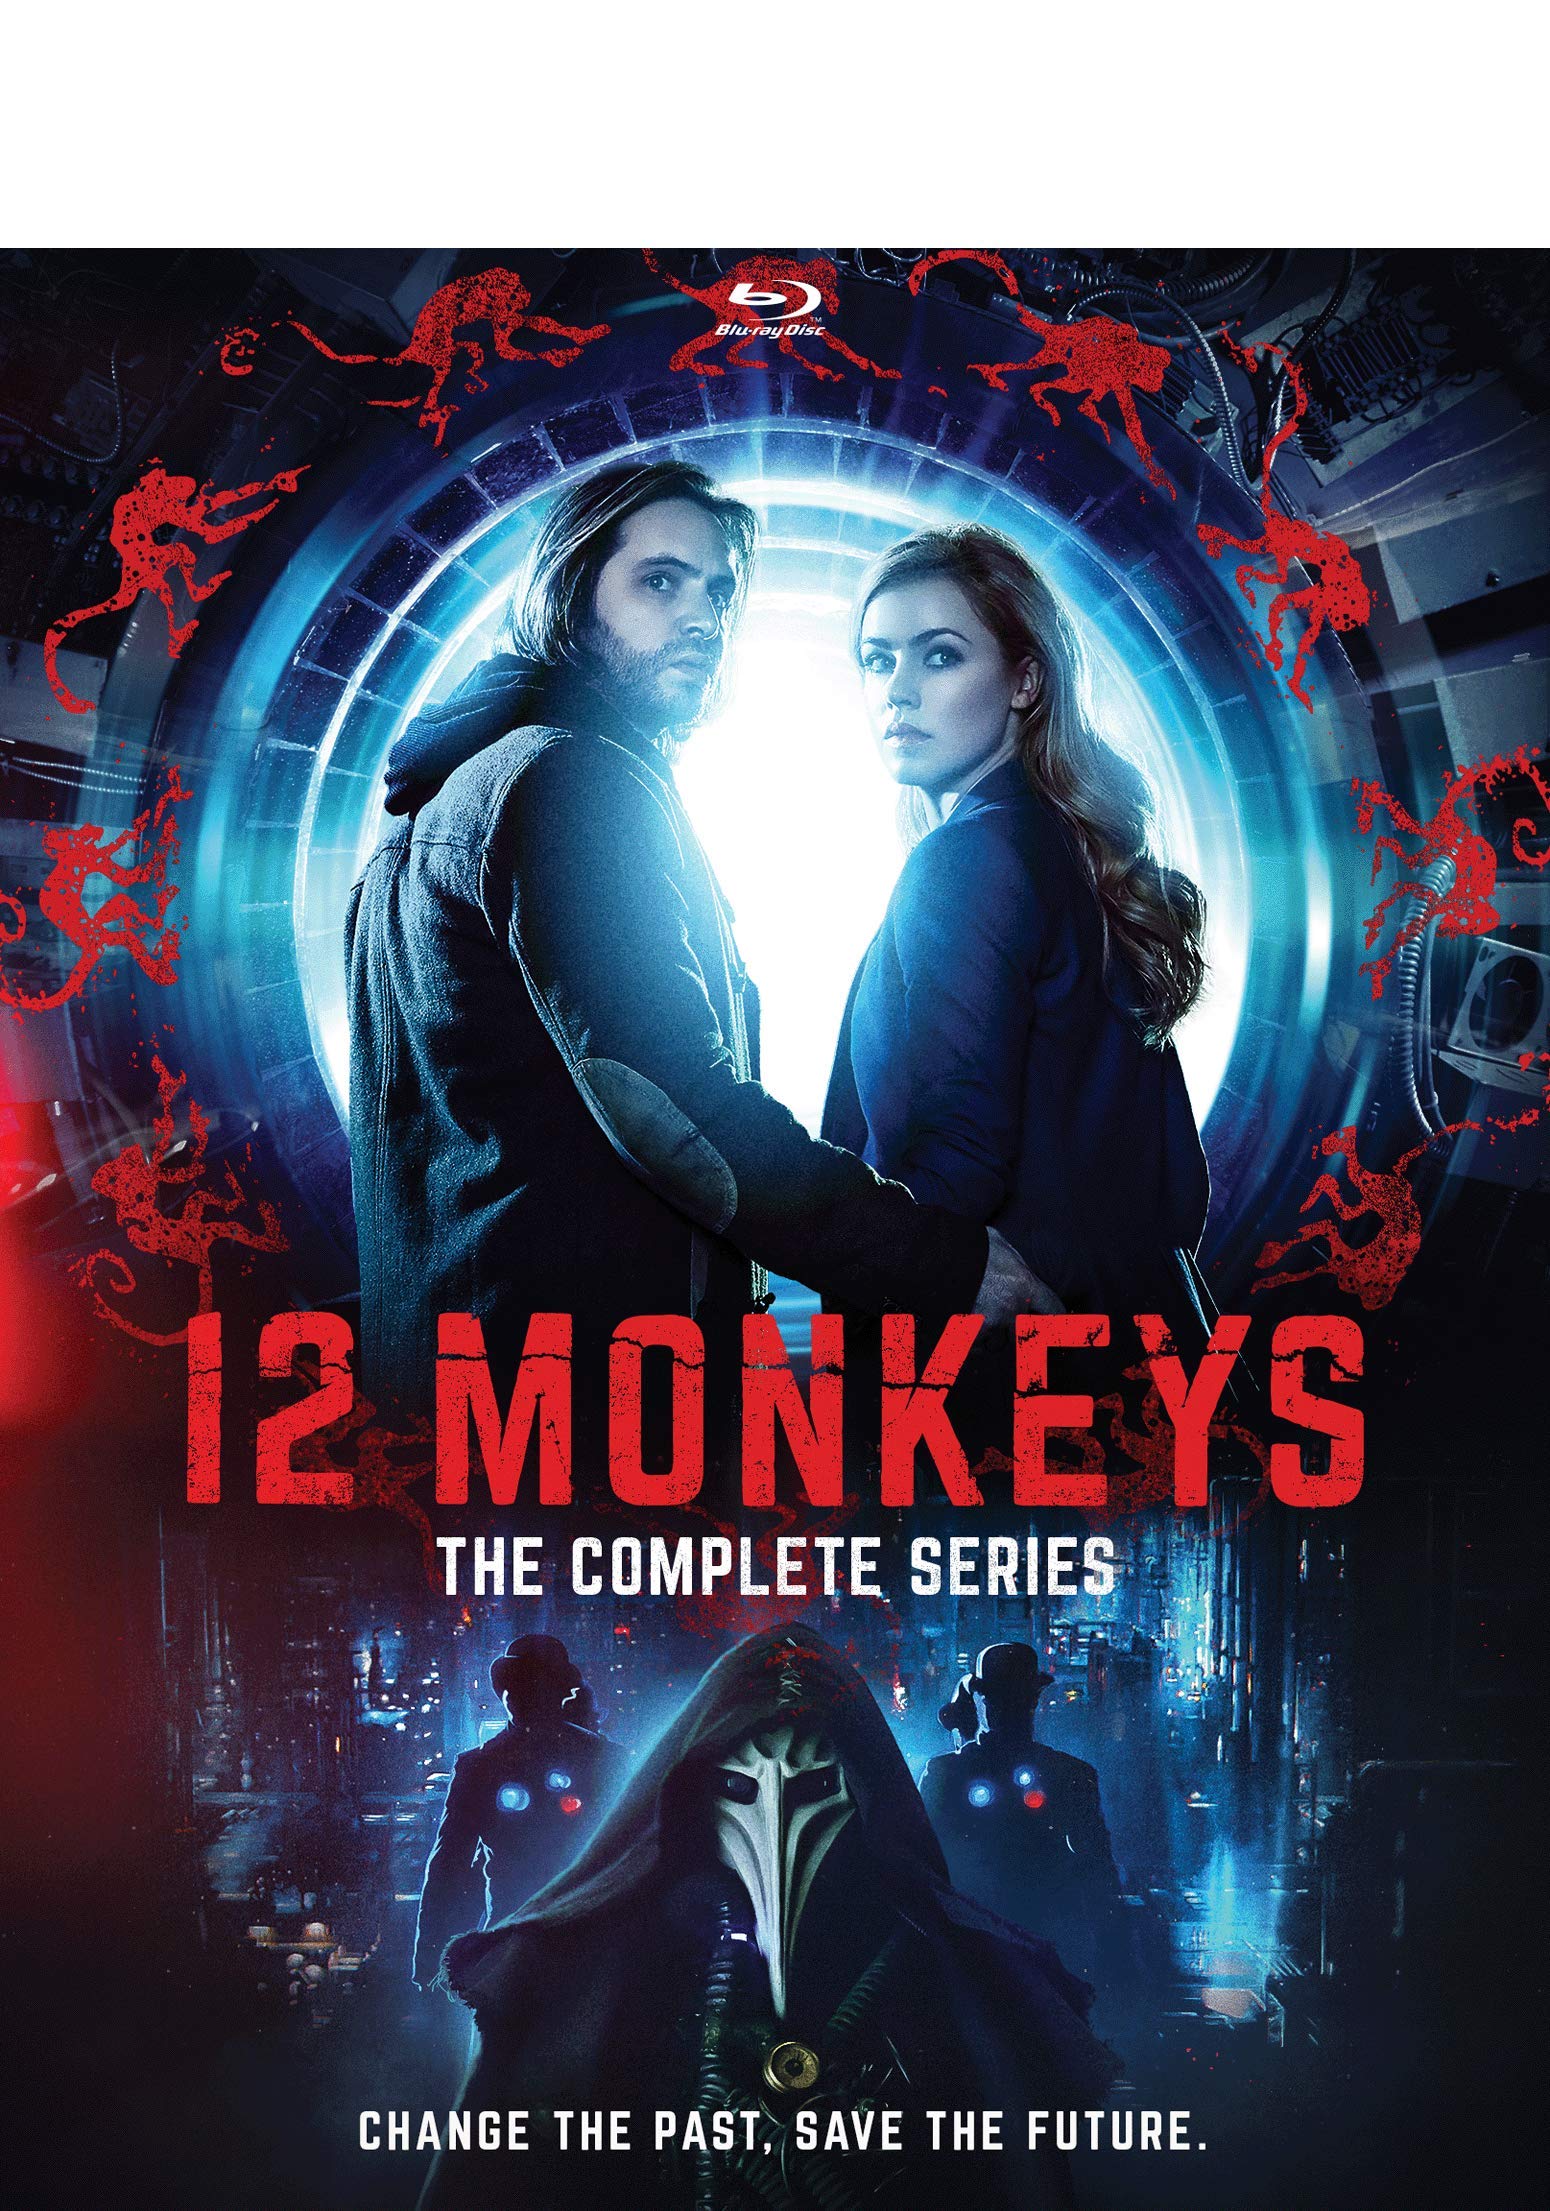 12 Monkeys: The Complete Series (Blu-ray) $22 + Free Shipping w/ Prime or on $25+